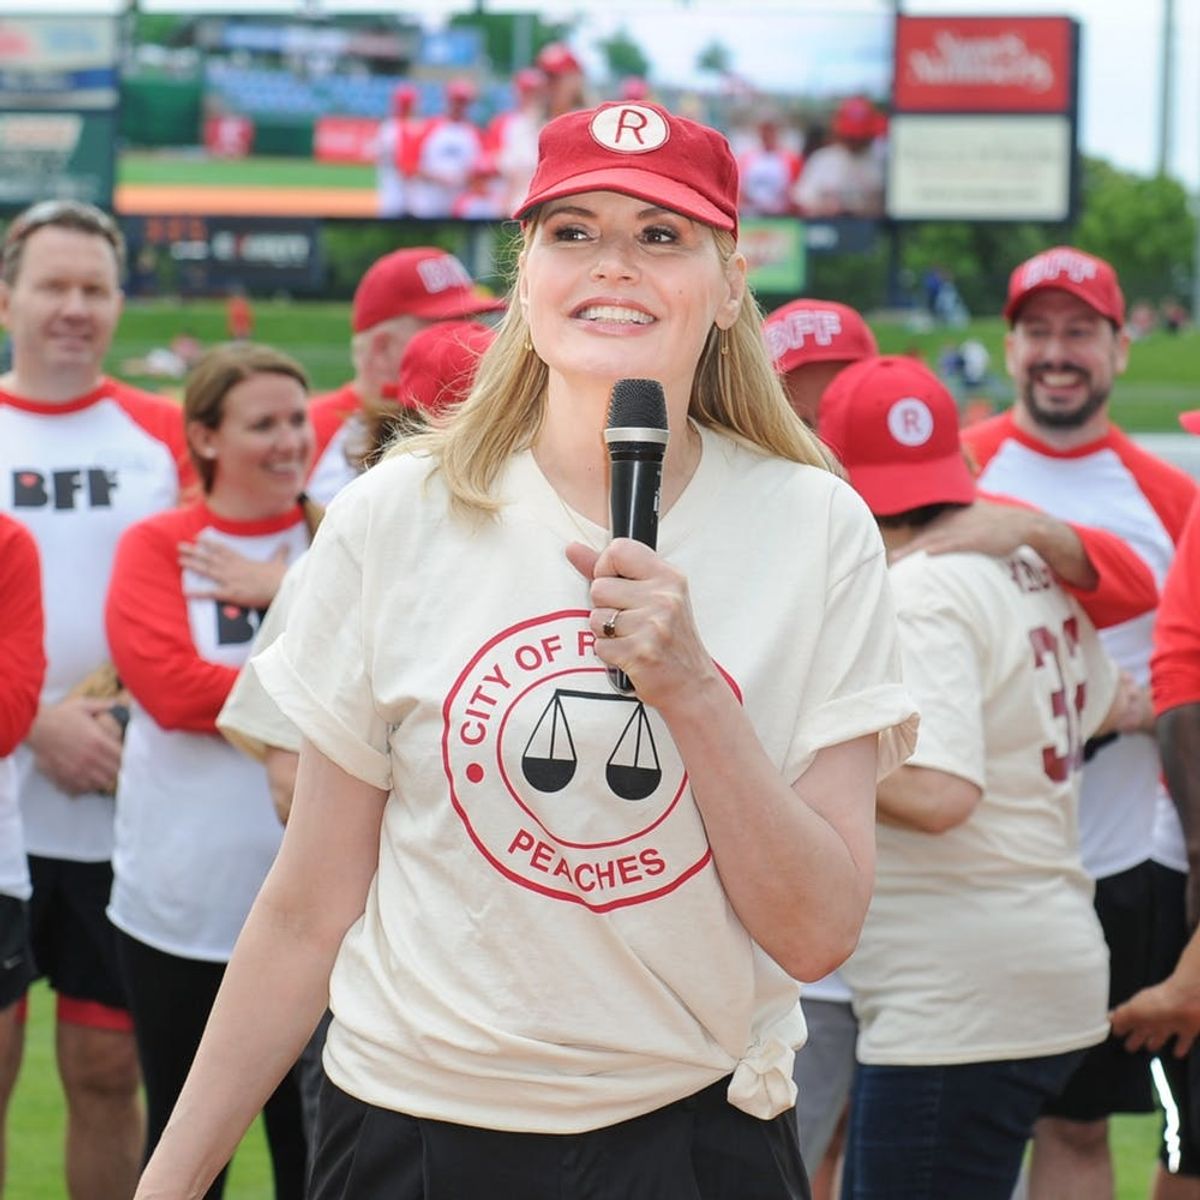 Amazon Is Reportedly Rebooting ‘A League of Their Own’ As a TV Series